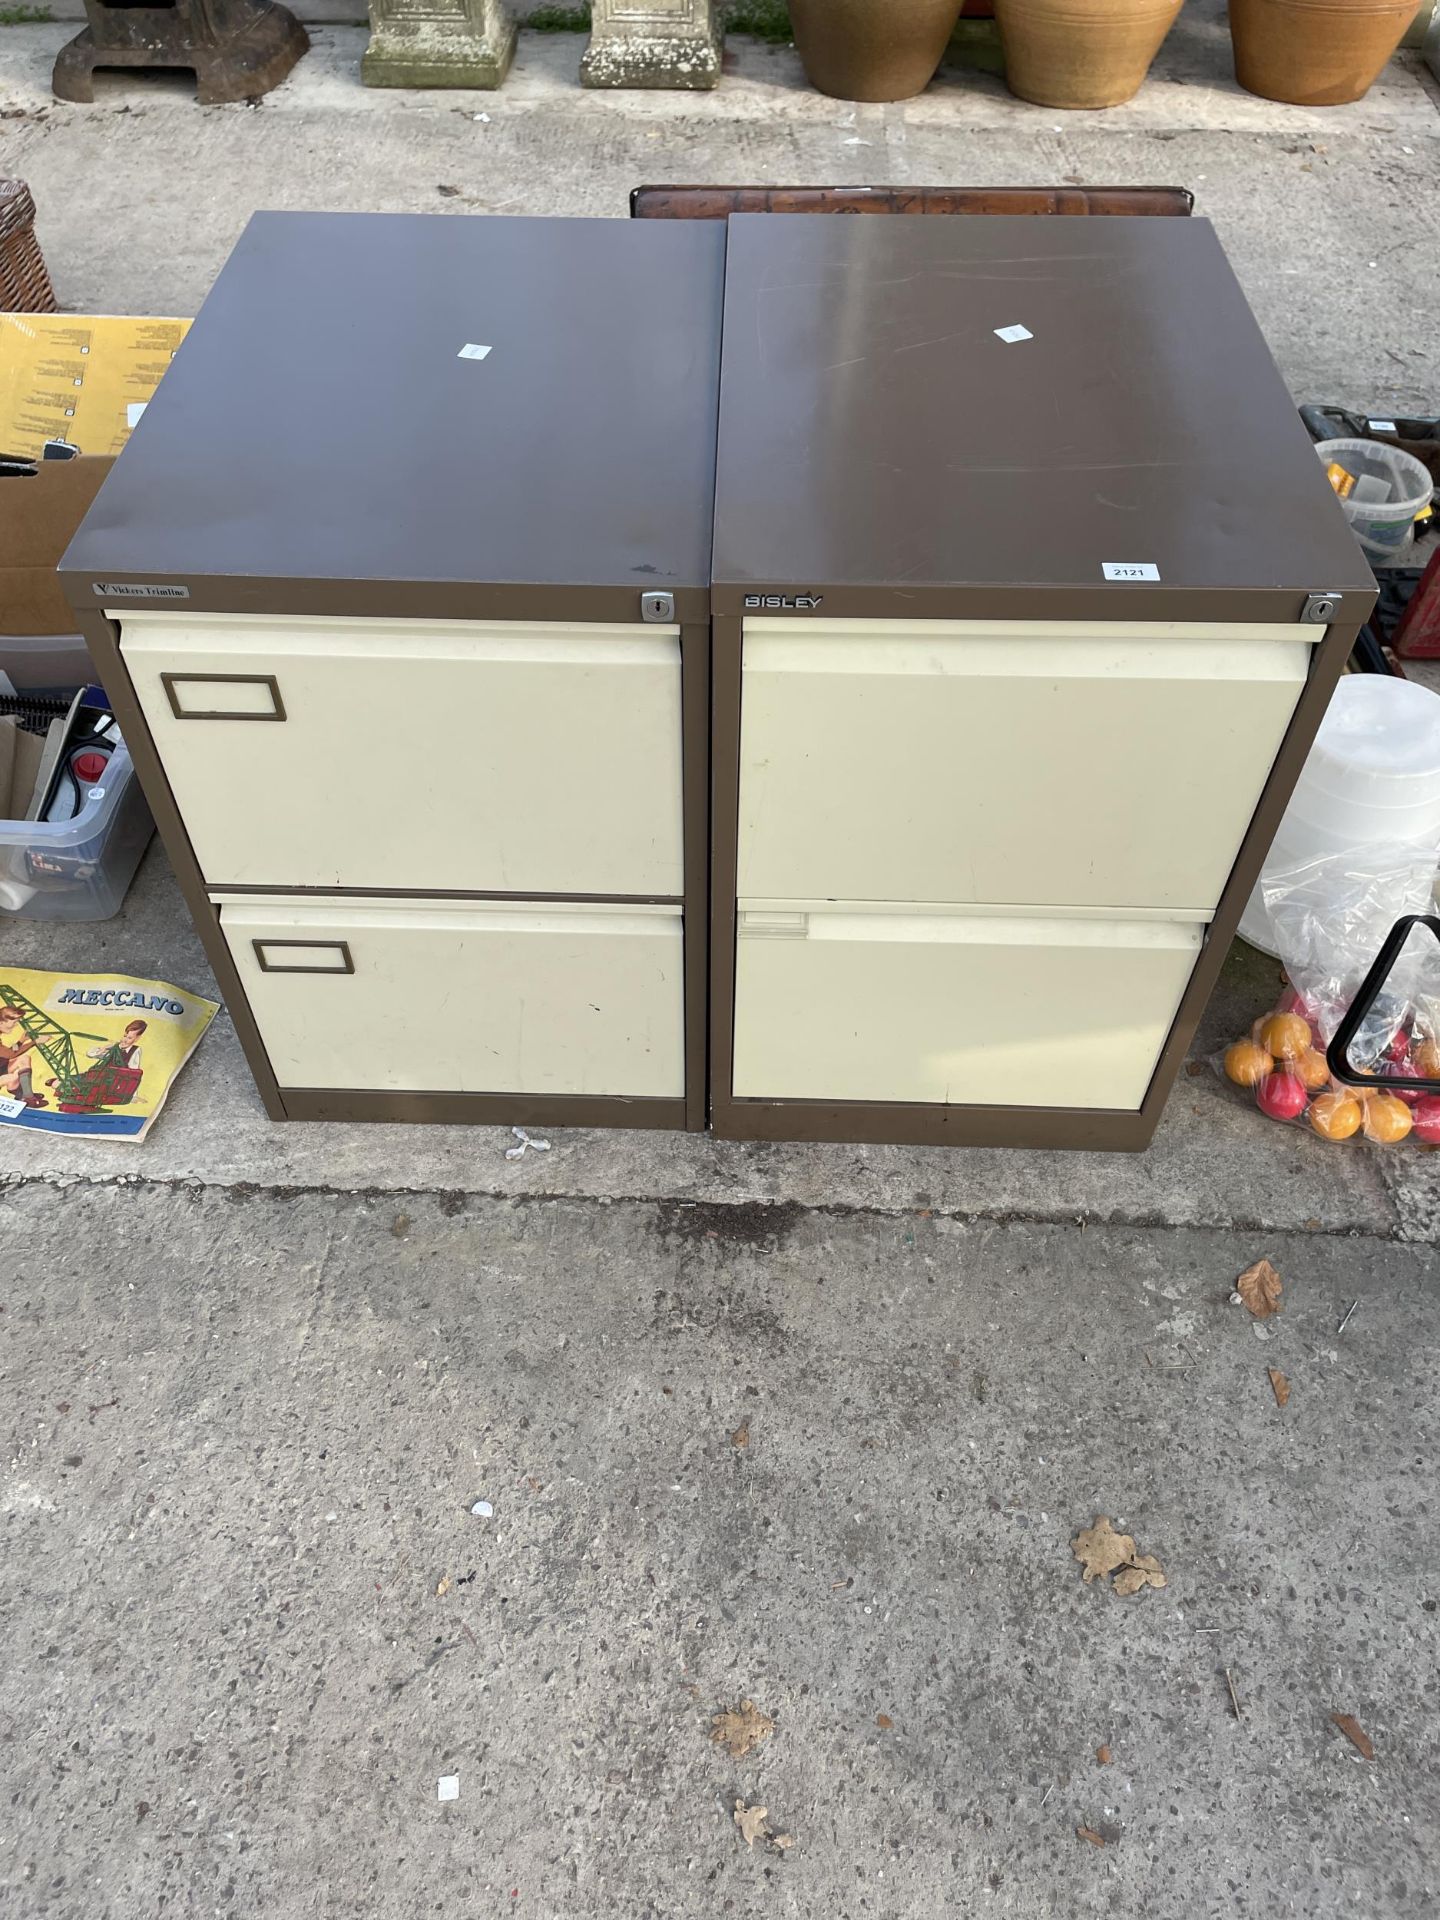 TWO METAL TWO DRAWER FILING CABINETS